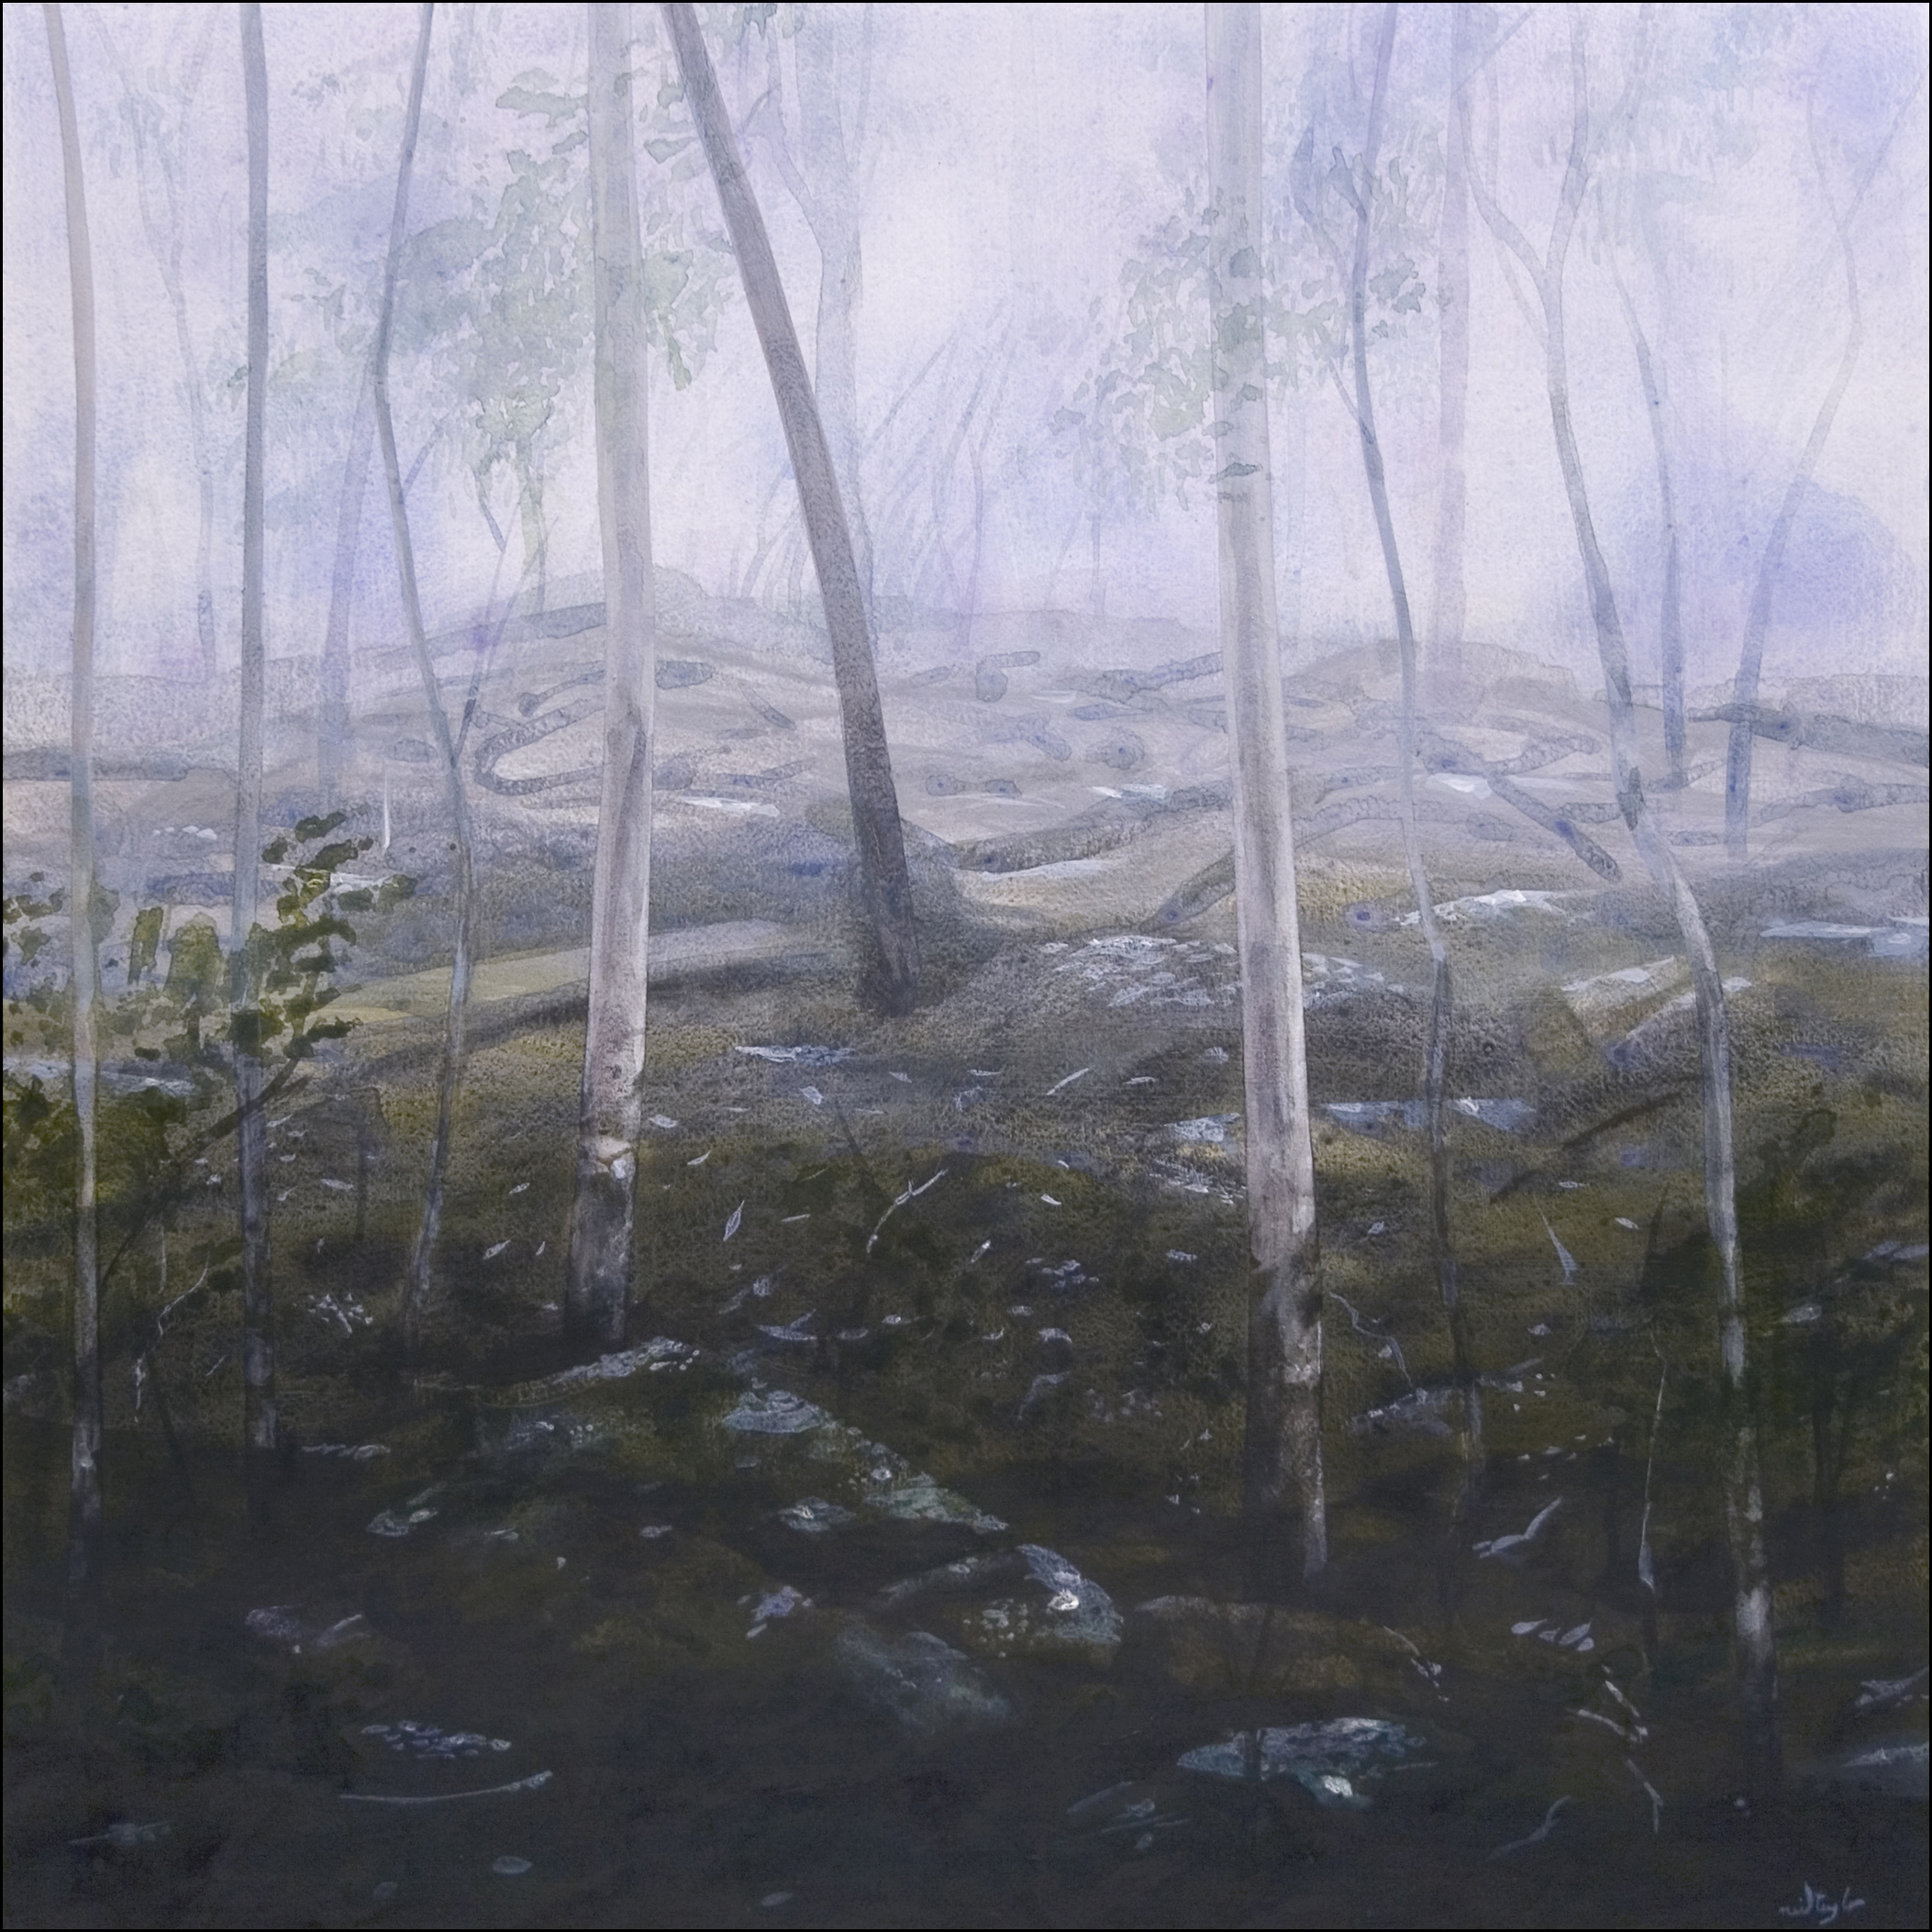 Neil Taylor 'Eucalypts And Mist' watercolour on paper on canvas 76 x 76cm $4,200